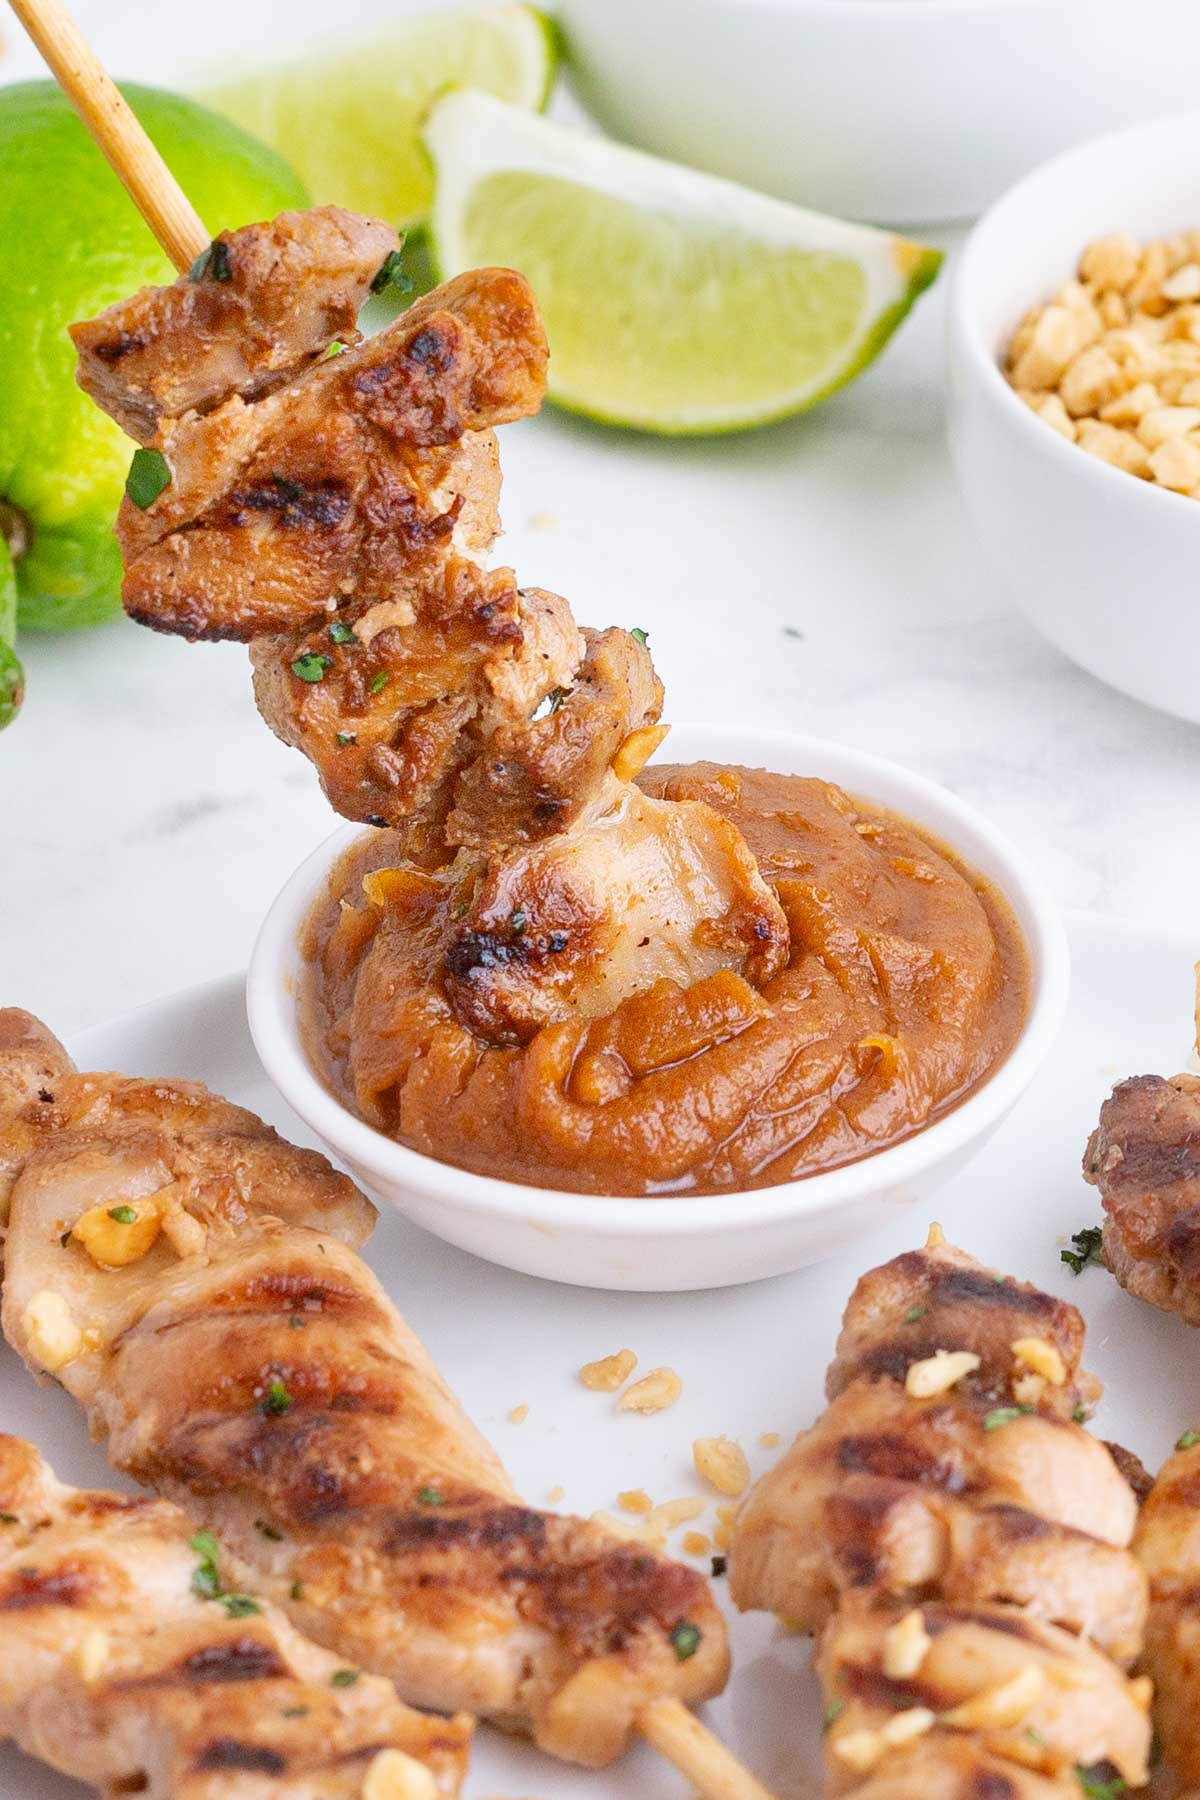 Serve chicken satay with peanut sauce and crushed peanuts.